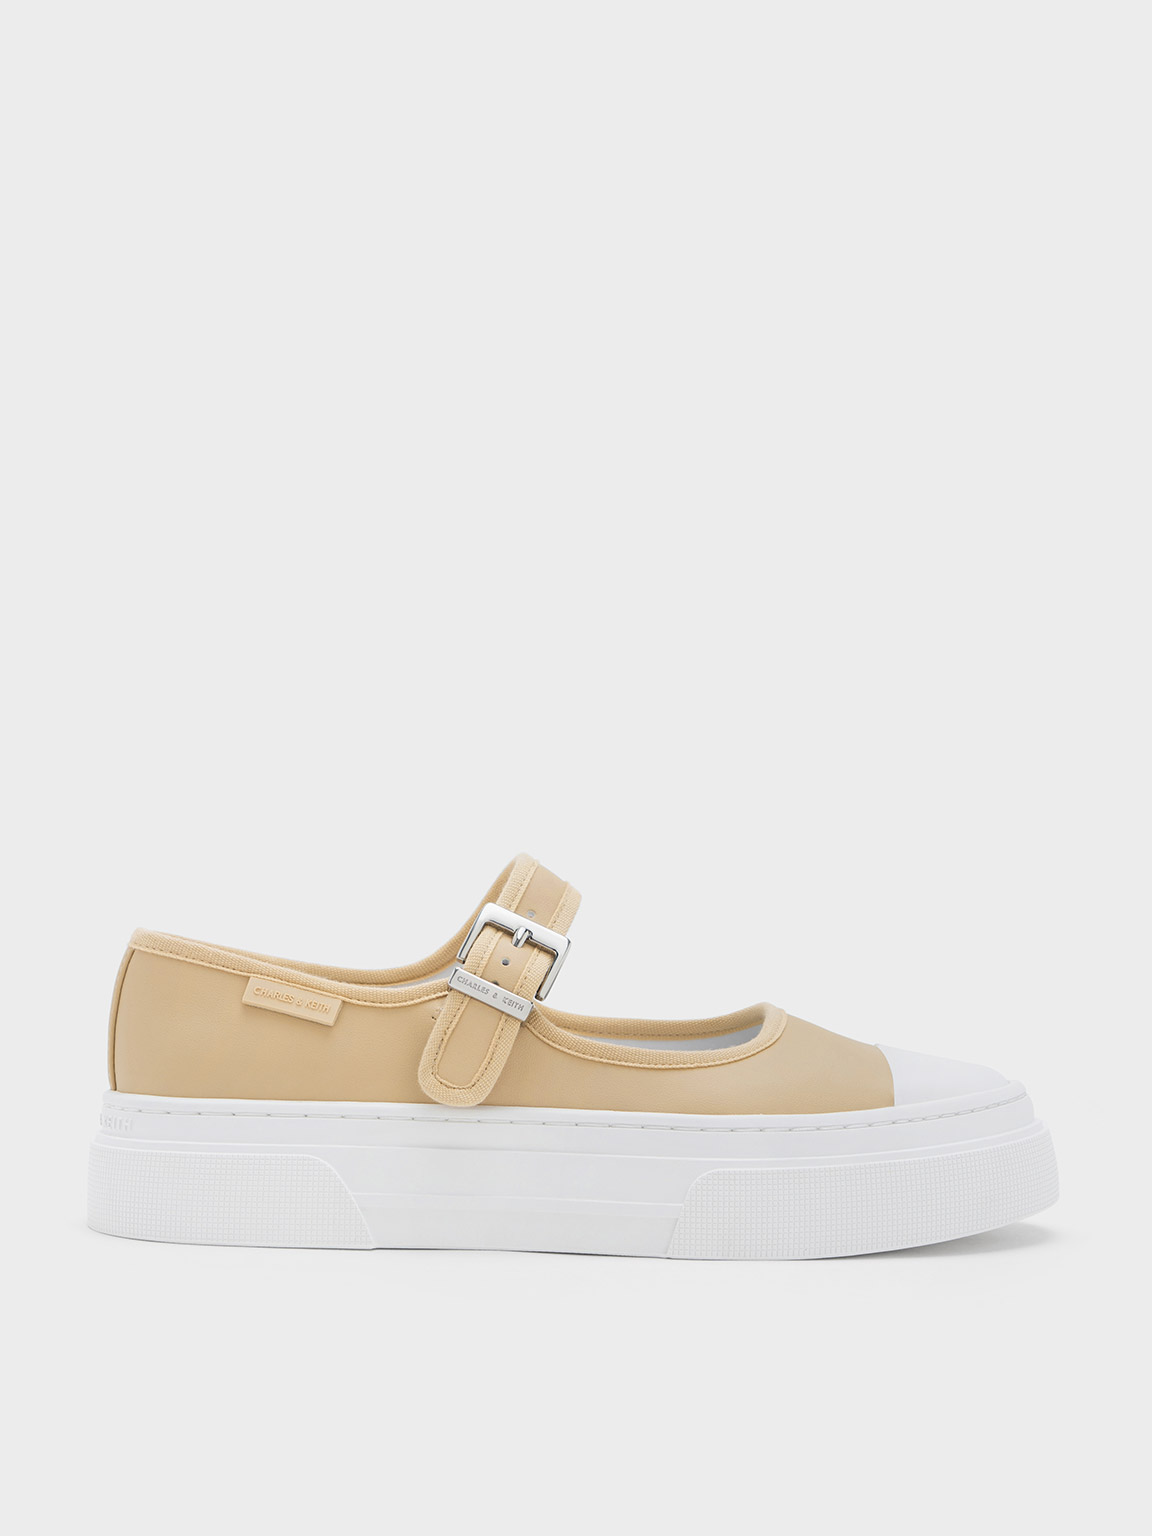 Charles & Keith Two-tone Mary Jane Sneakers In Beige